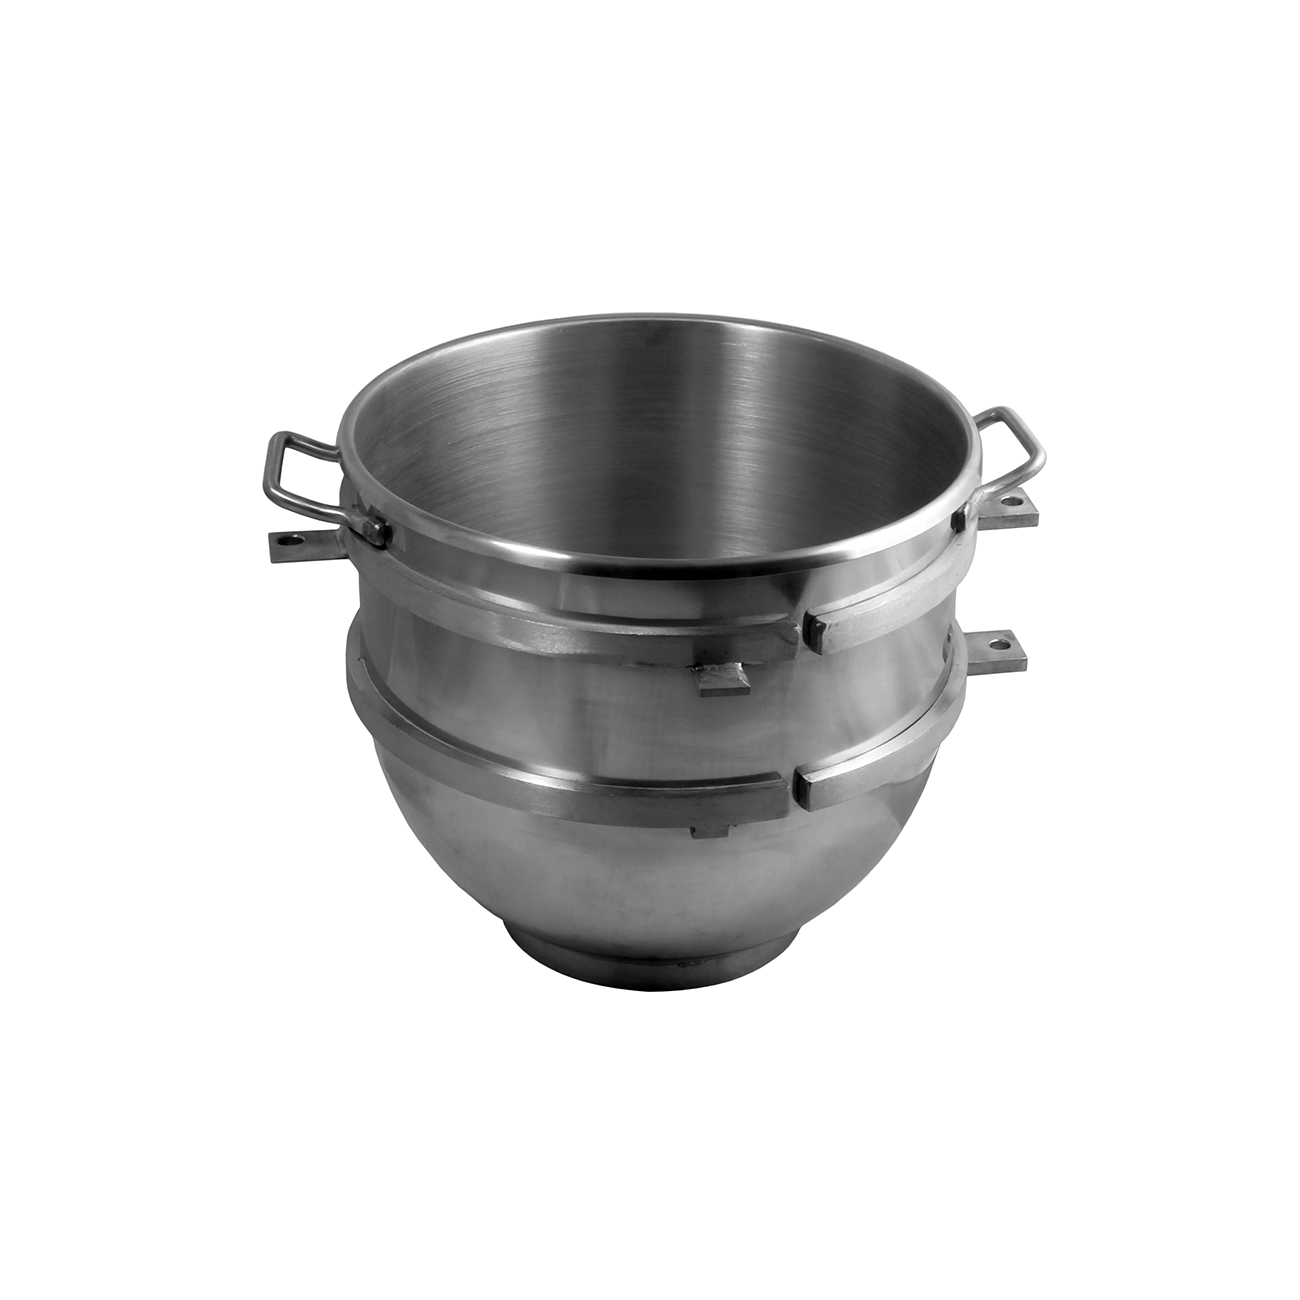 Hobart H600T 60 qt Bowlguard mixer comes with stainless steel bowl and —  Palm Beach Restaurant Equipment